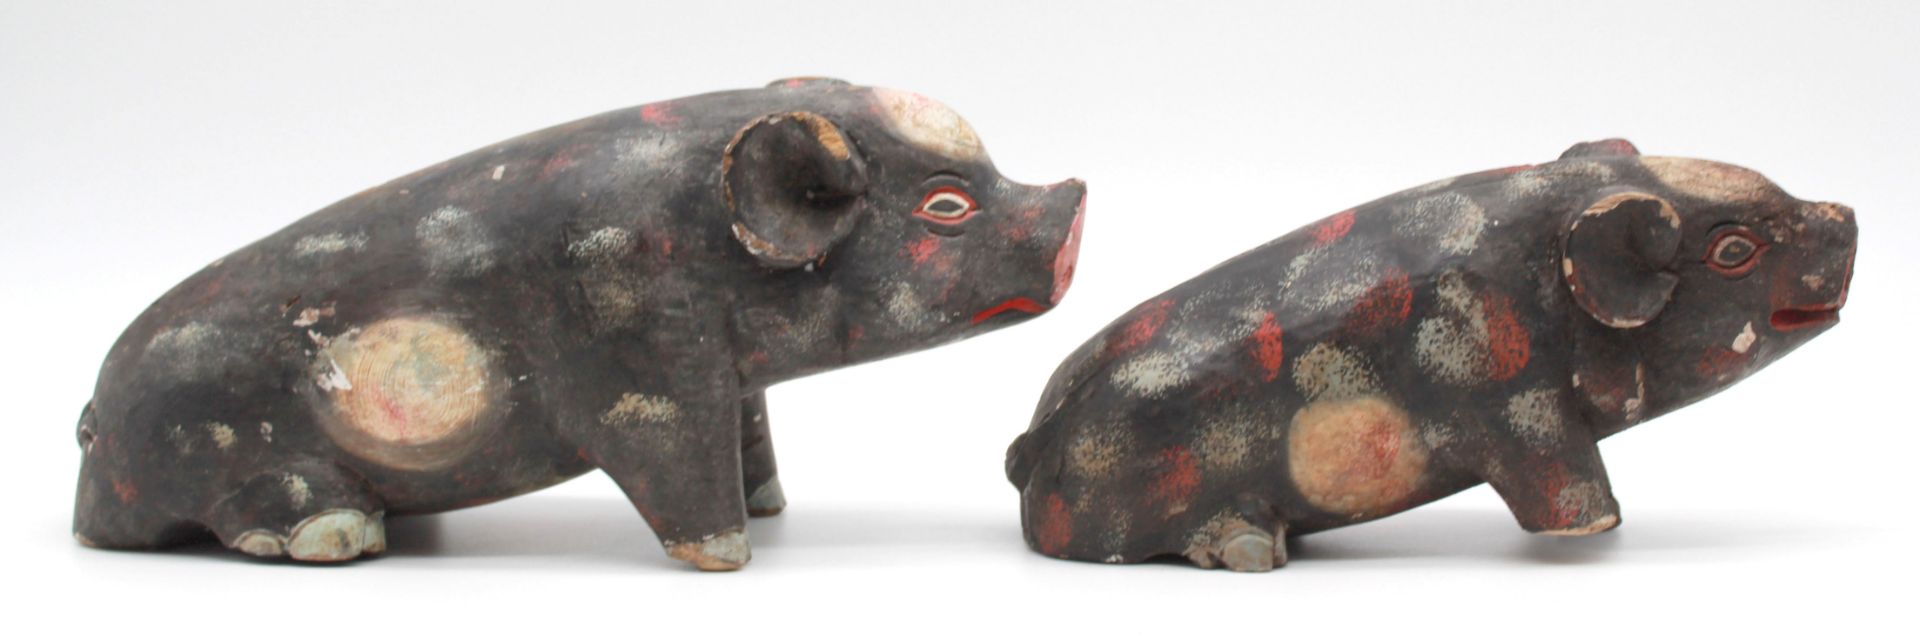 2 figures. Animals. Pigs. Carved and painted wood. Probably West Africa. - Image 8 of 12